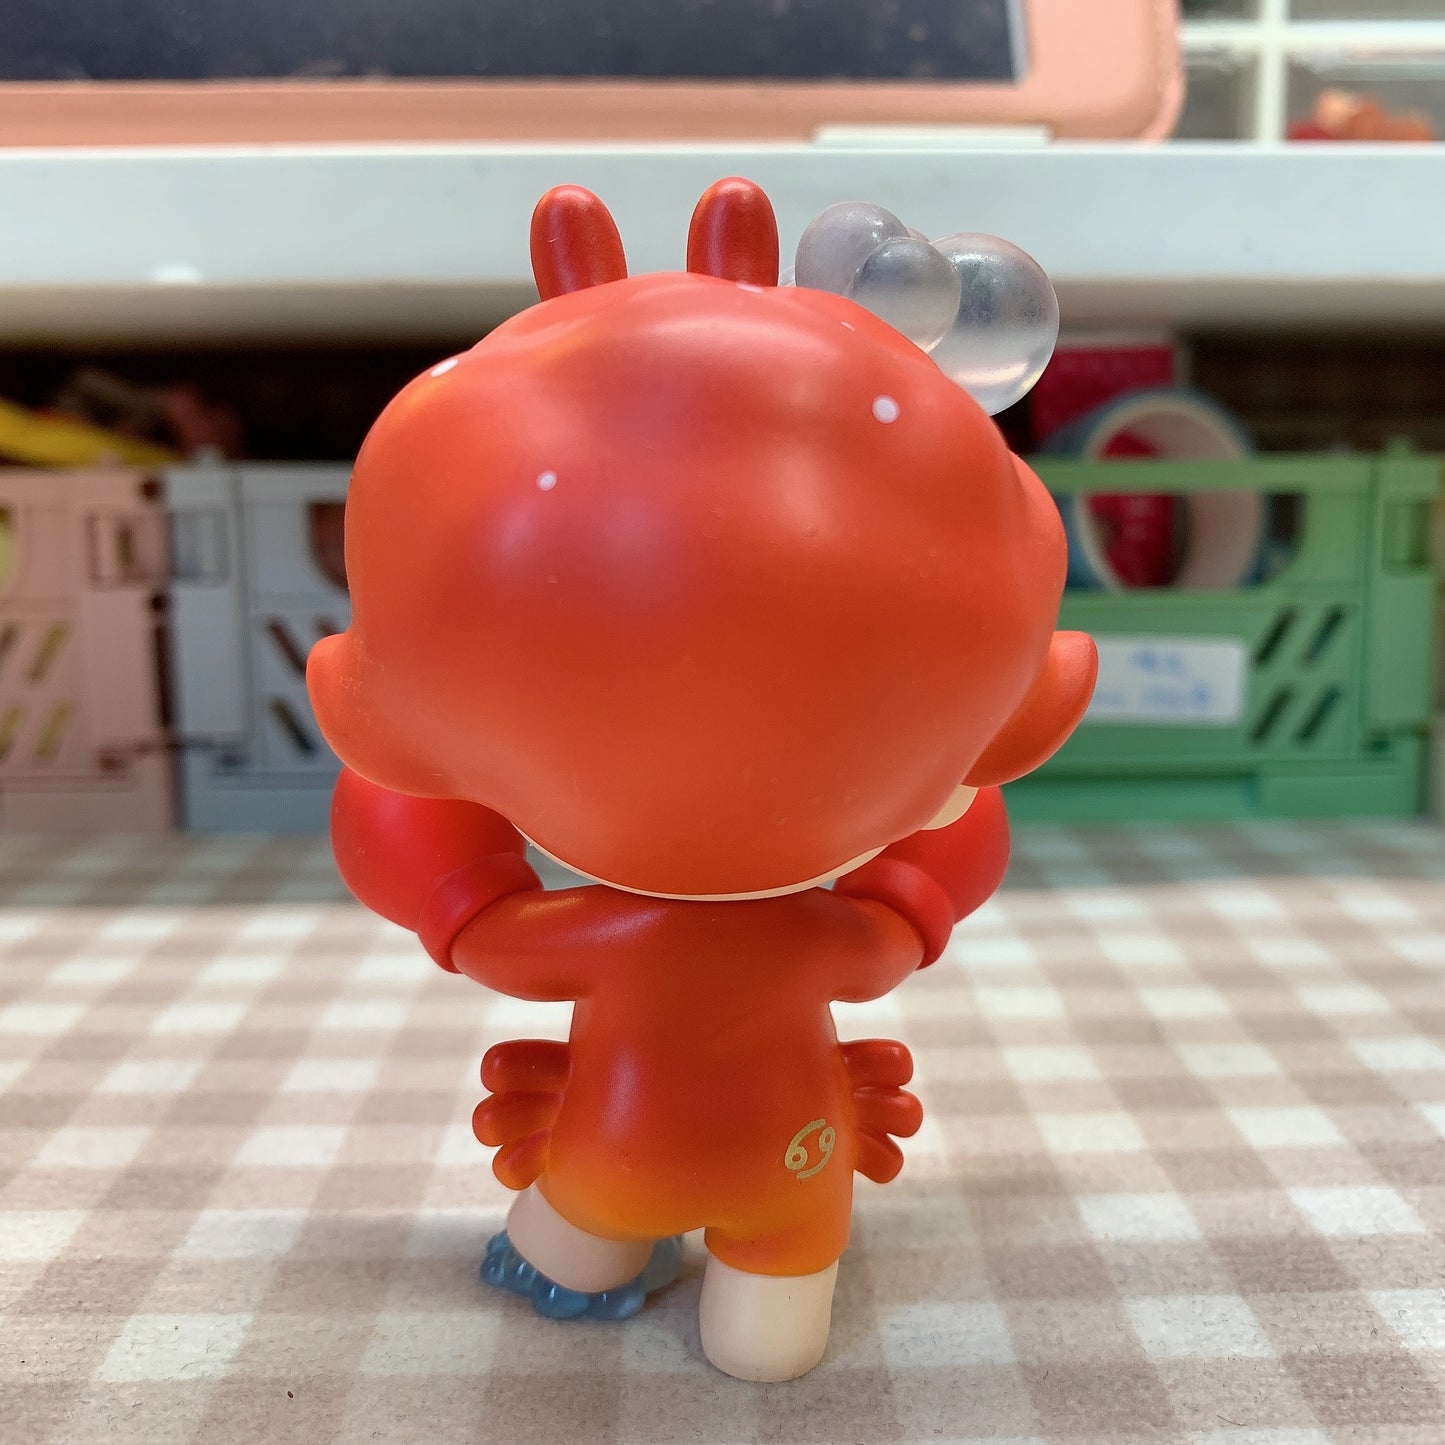 【PRELOVED and SALE 】POPMART Dimoo blind box toy Zodiac series Cancer